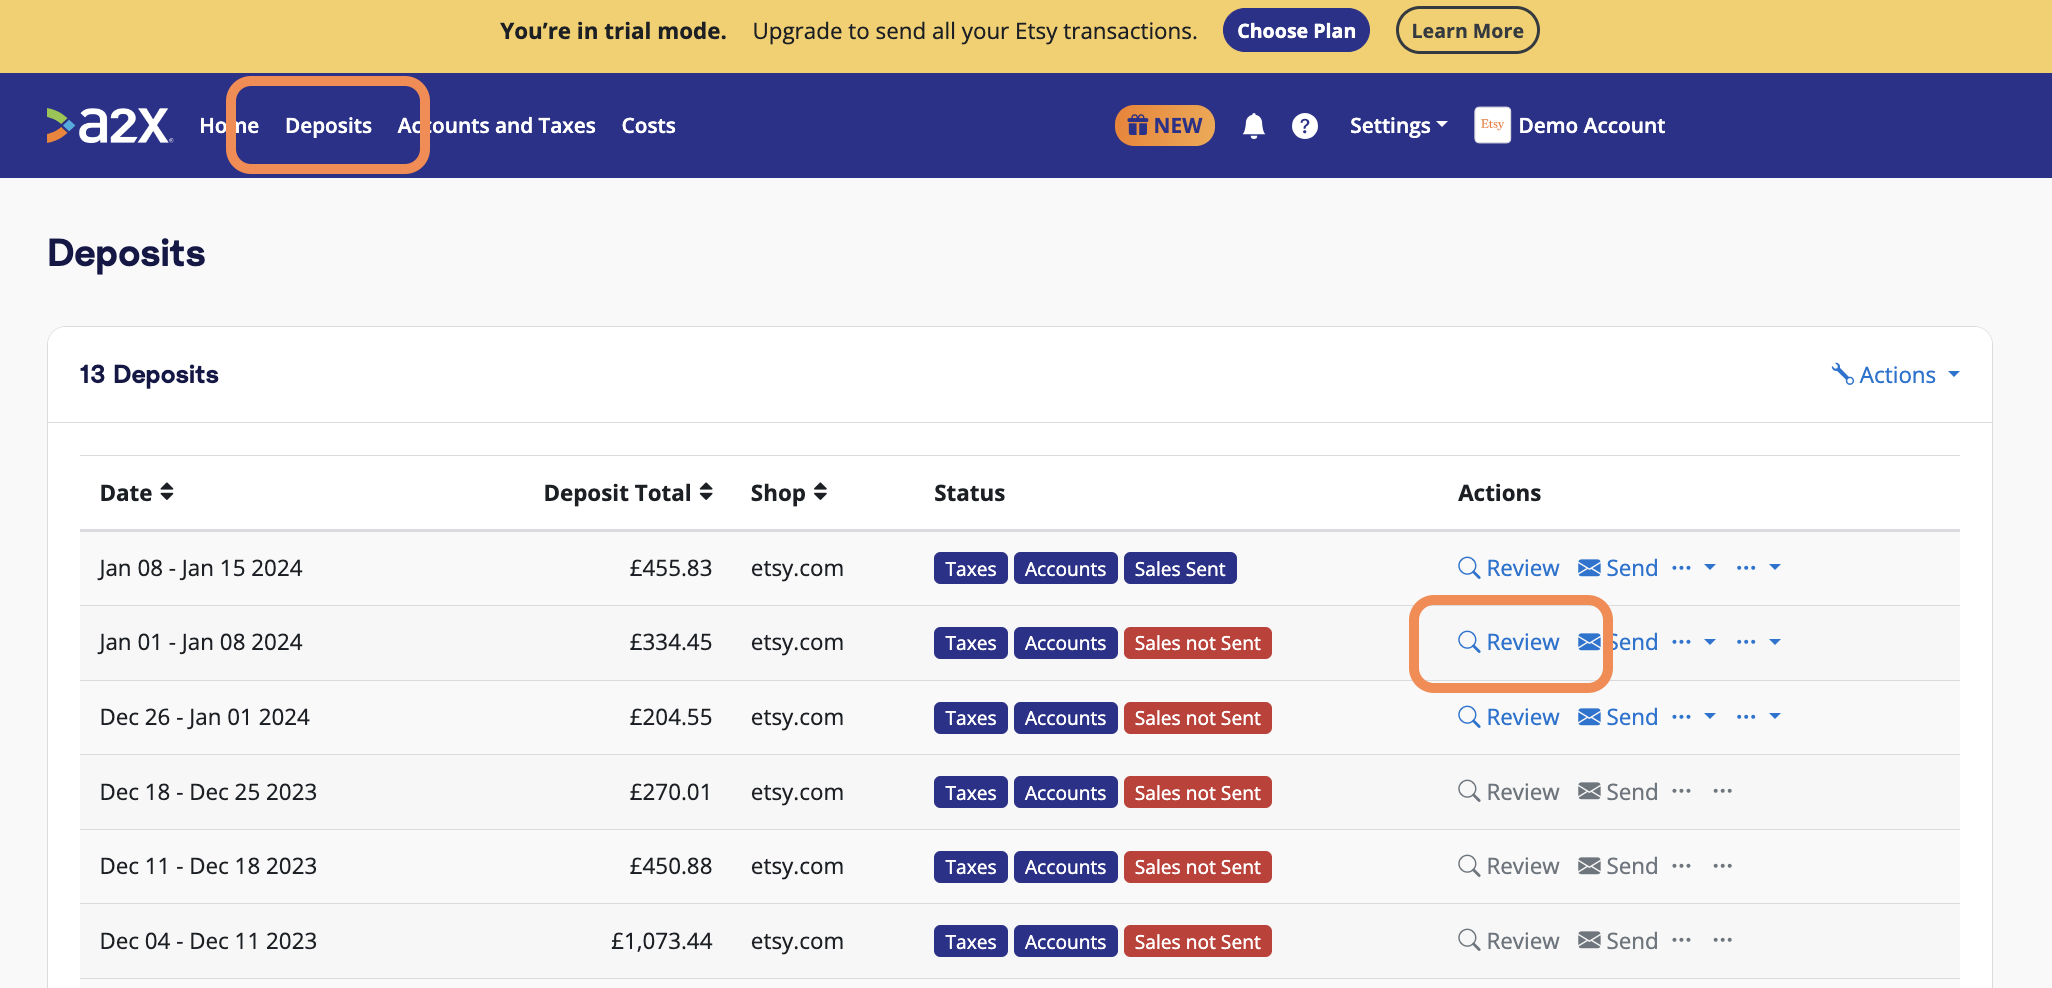 Click on the 'Deposits' tab in A2X, then click on 'Review' to see how A2X has mapped the transactions making up an Etsy deposit.